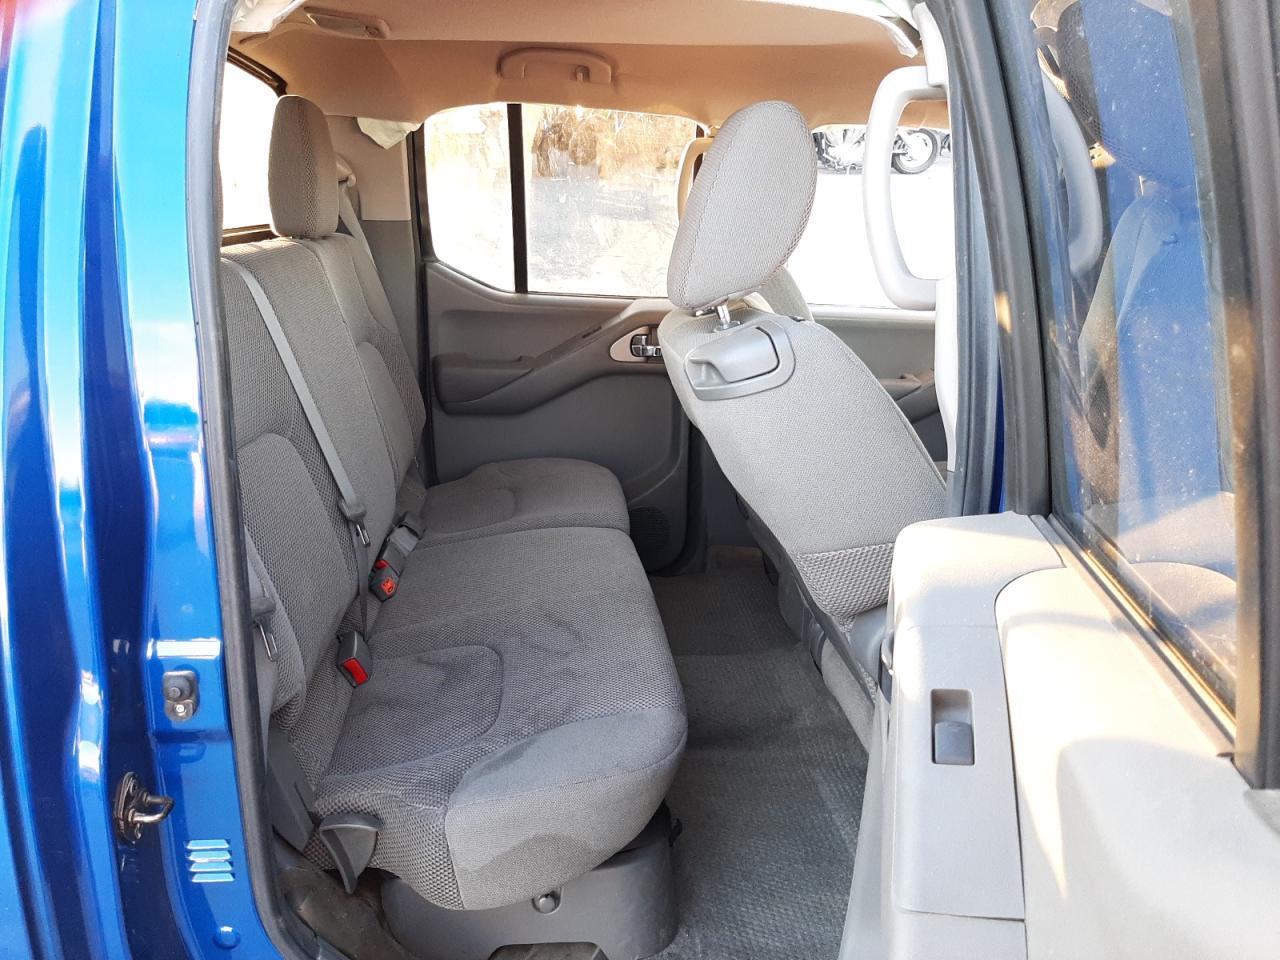 2014 NISSAN FRONTIER S for Sale